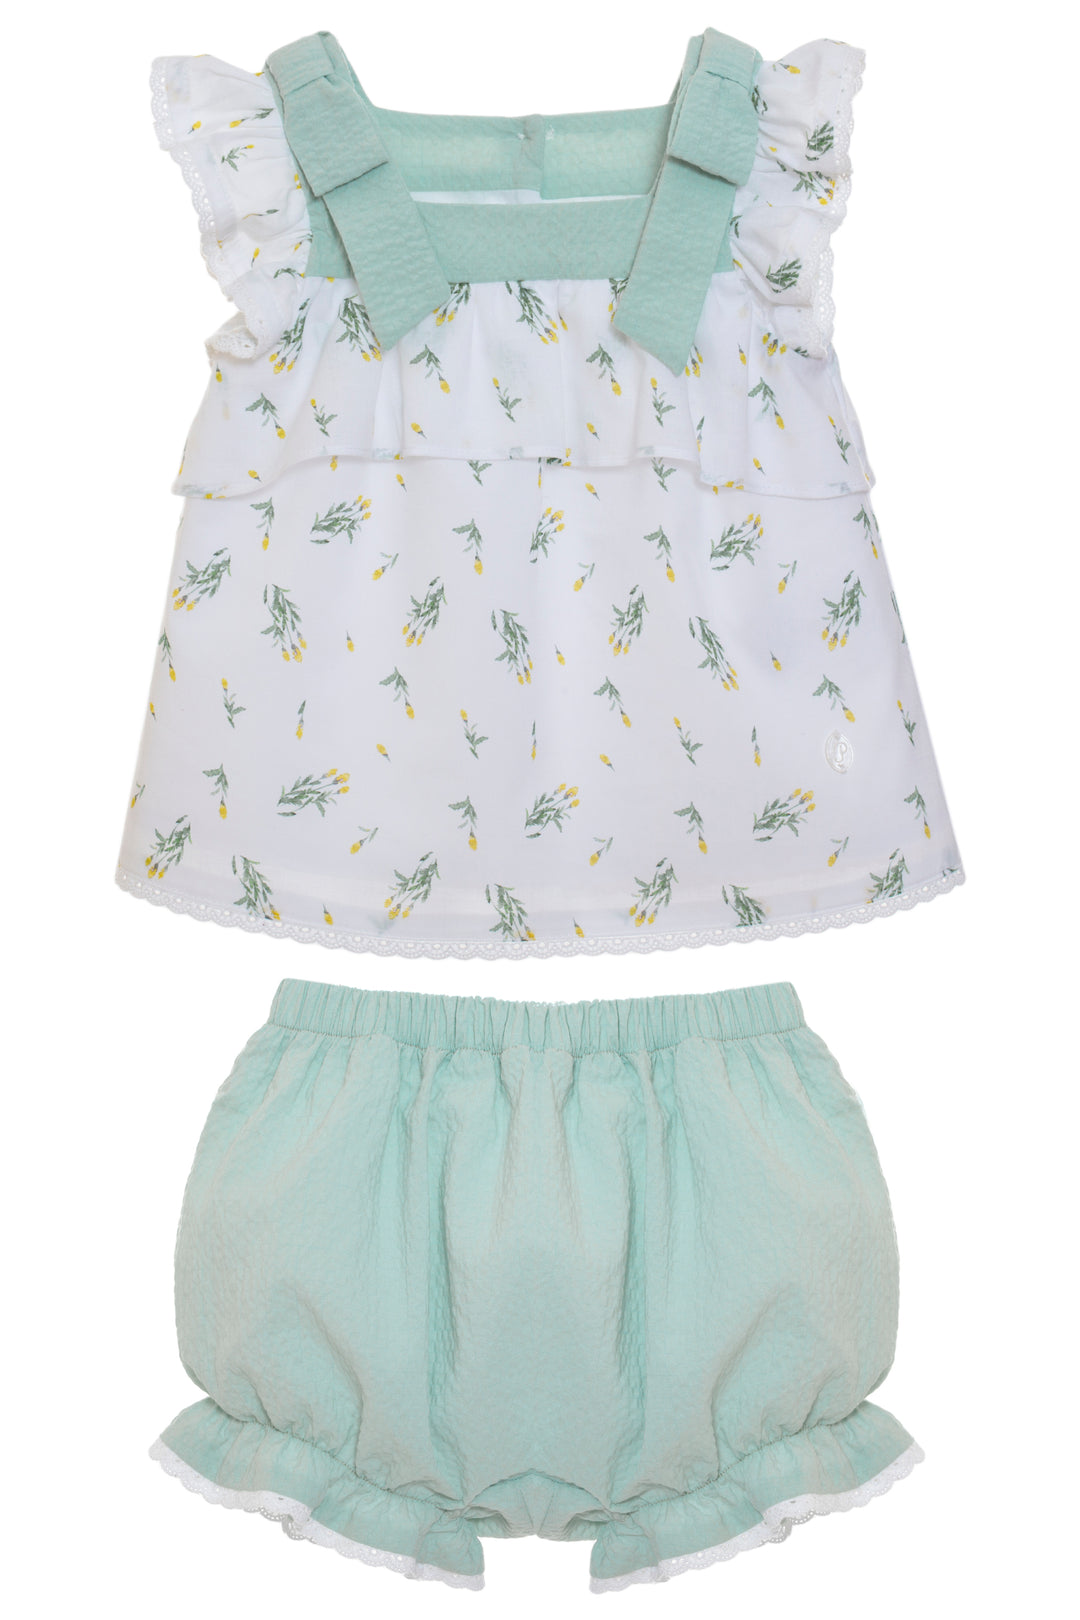 Patachou "Marni" Sage Green Floral Blouse & Bloomers | Millie and John